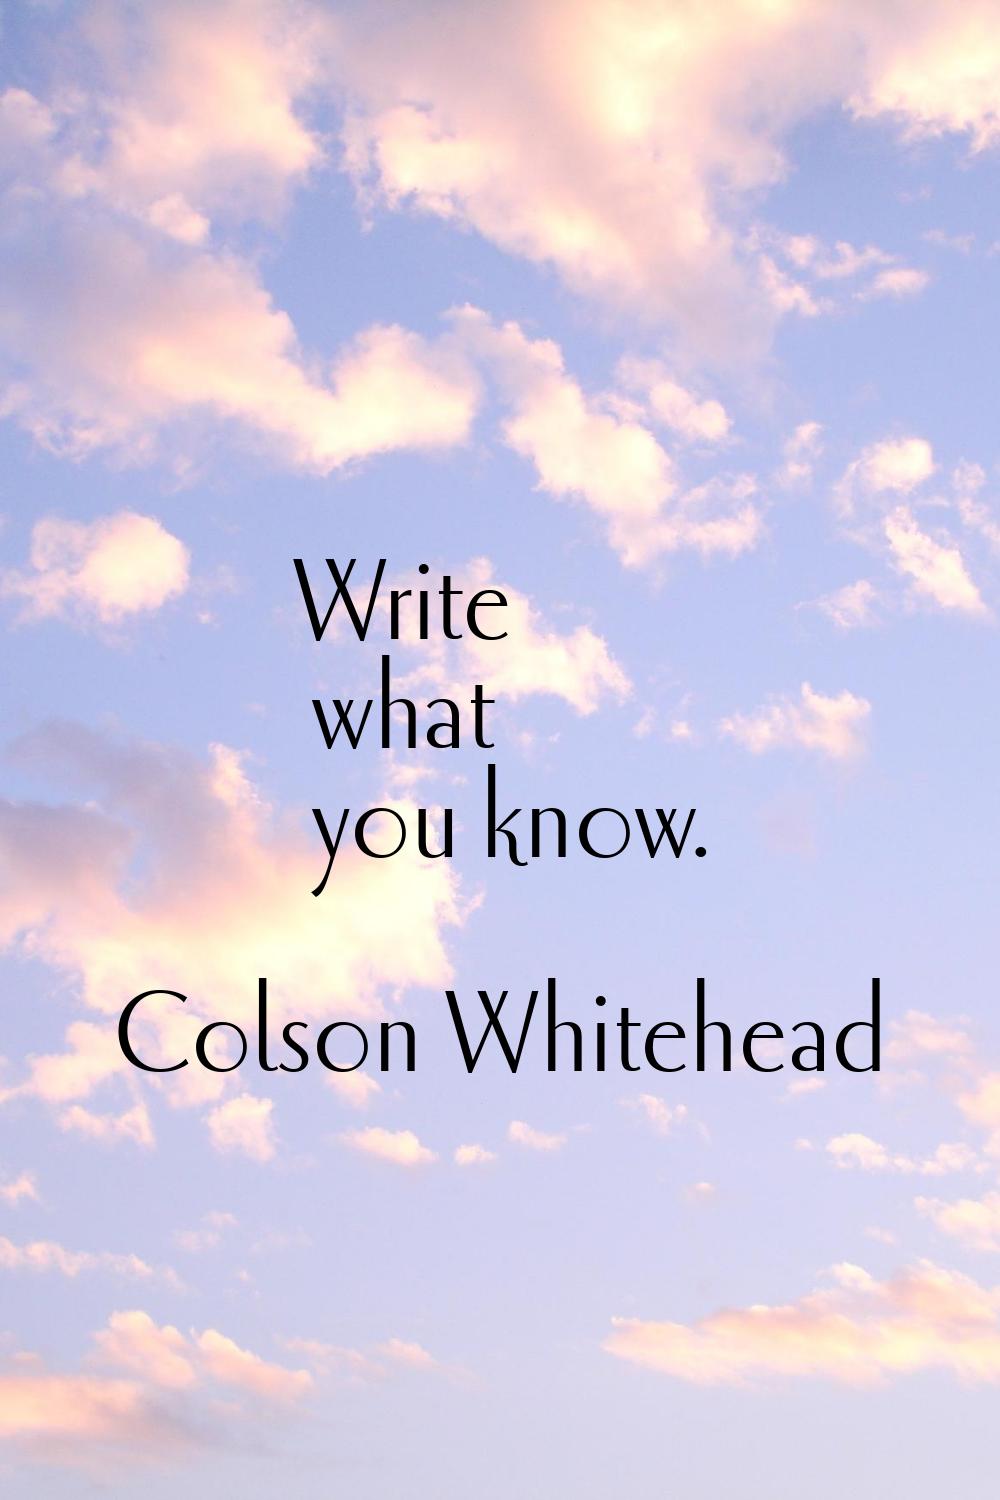 Write what you know.